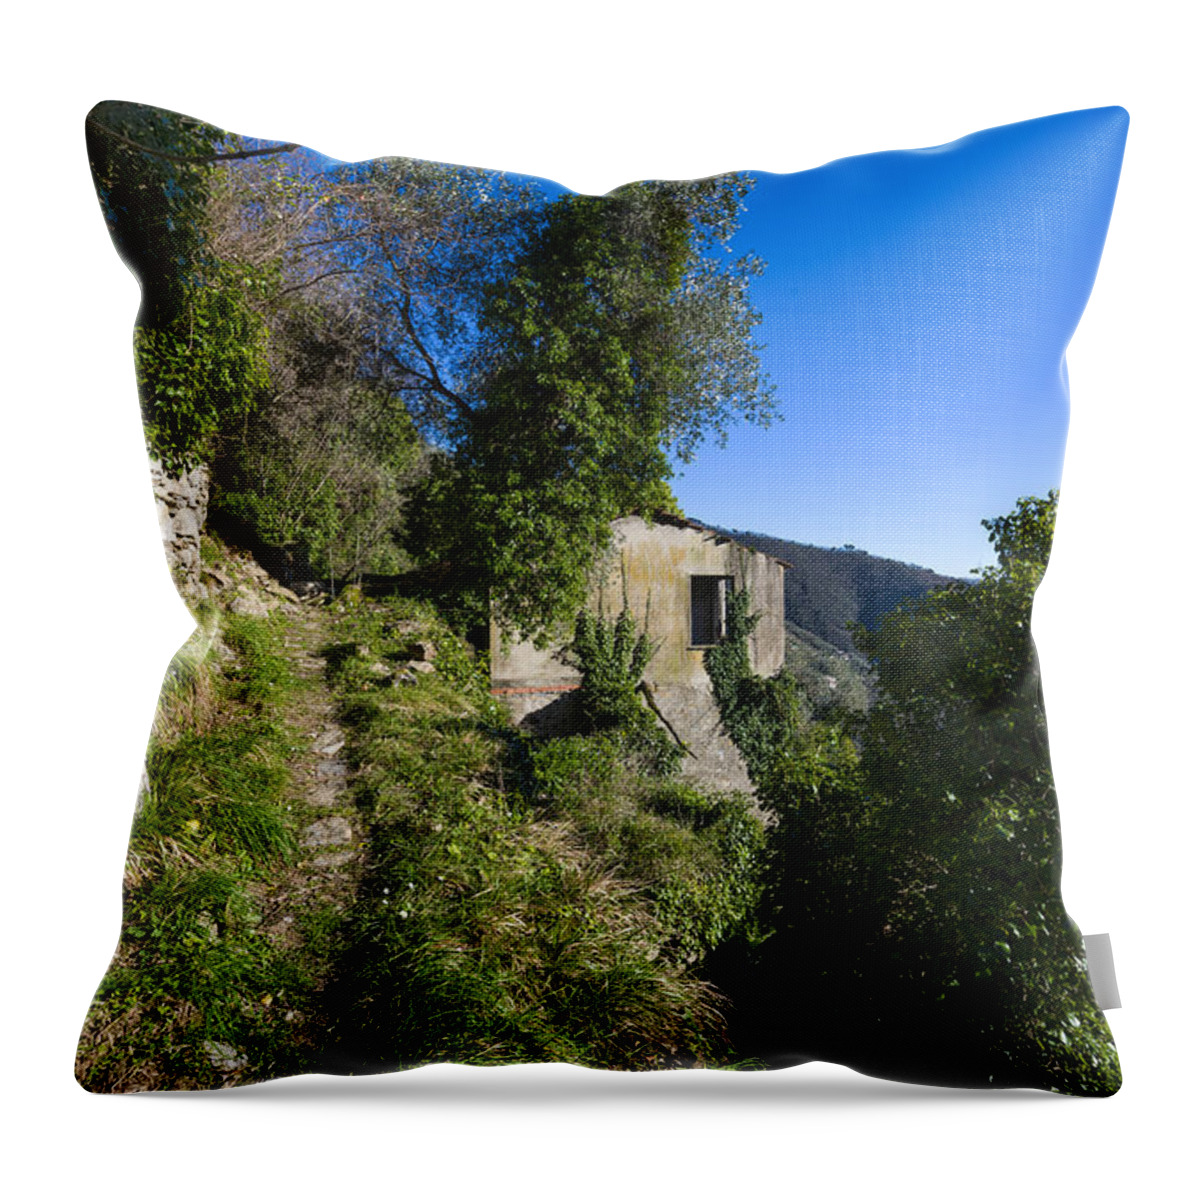 Zoagli Throw Pillow featuring the photograph The Path Near The Zoagli Old Abandoned House by Enrico Pelos